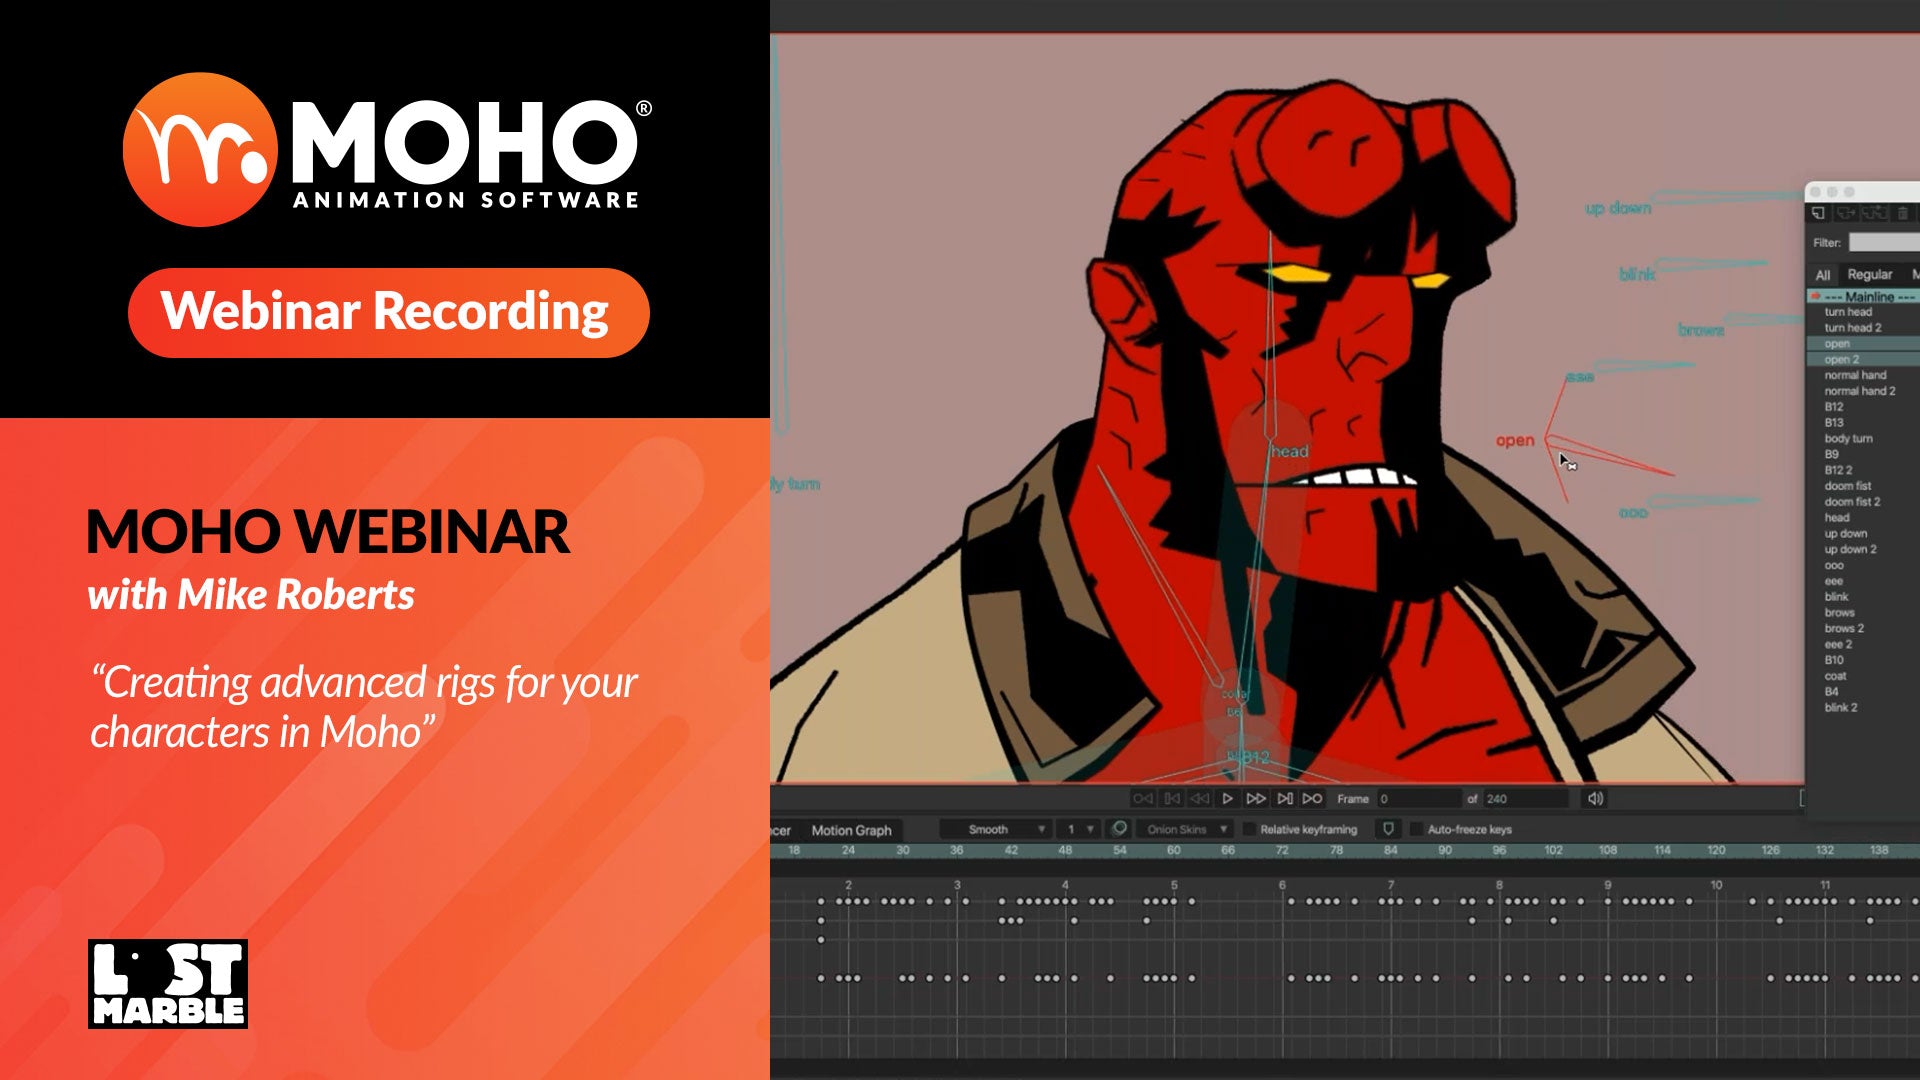 Webinar recording: Creating advanced rigs for your characters in Moho with Mike Roberts